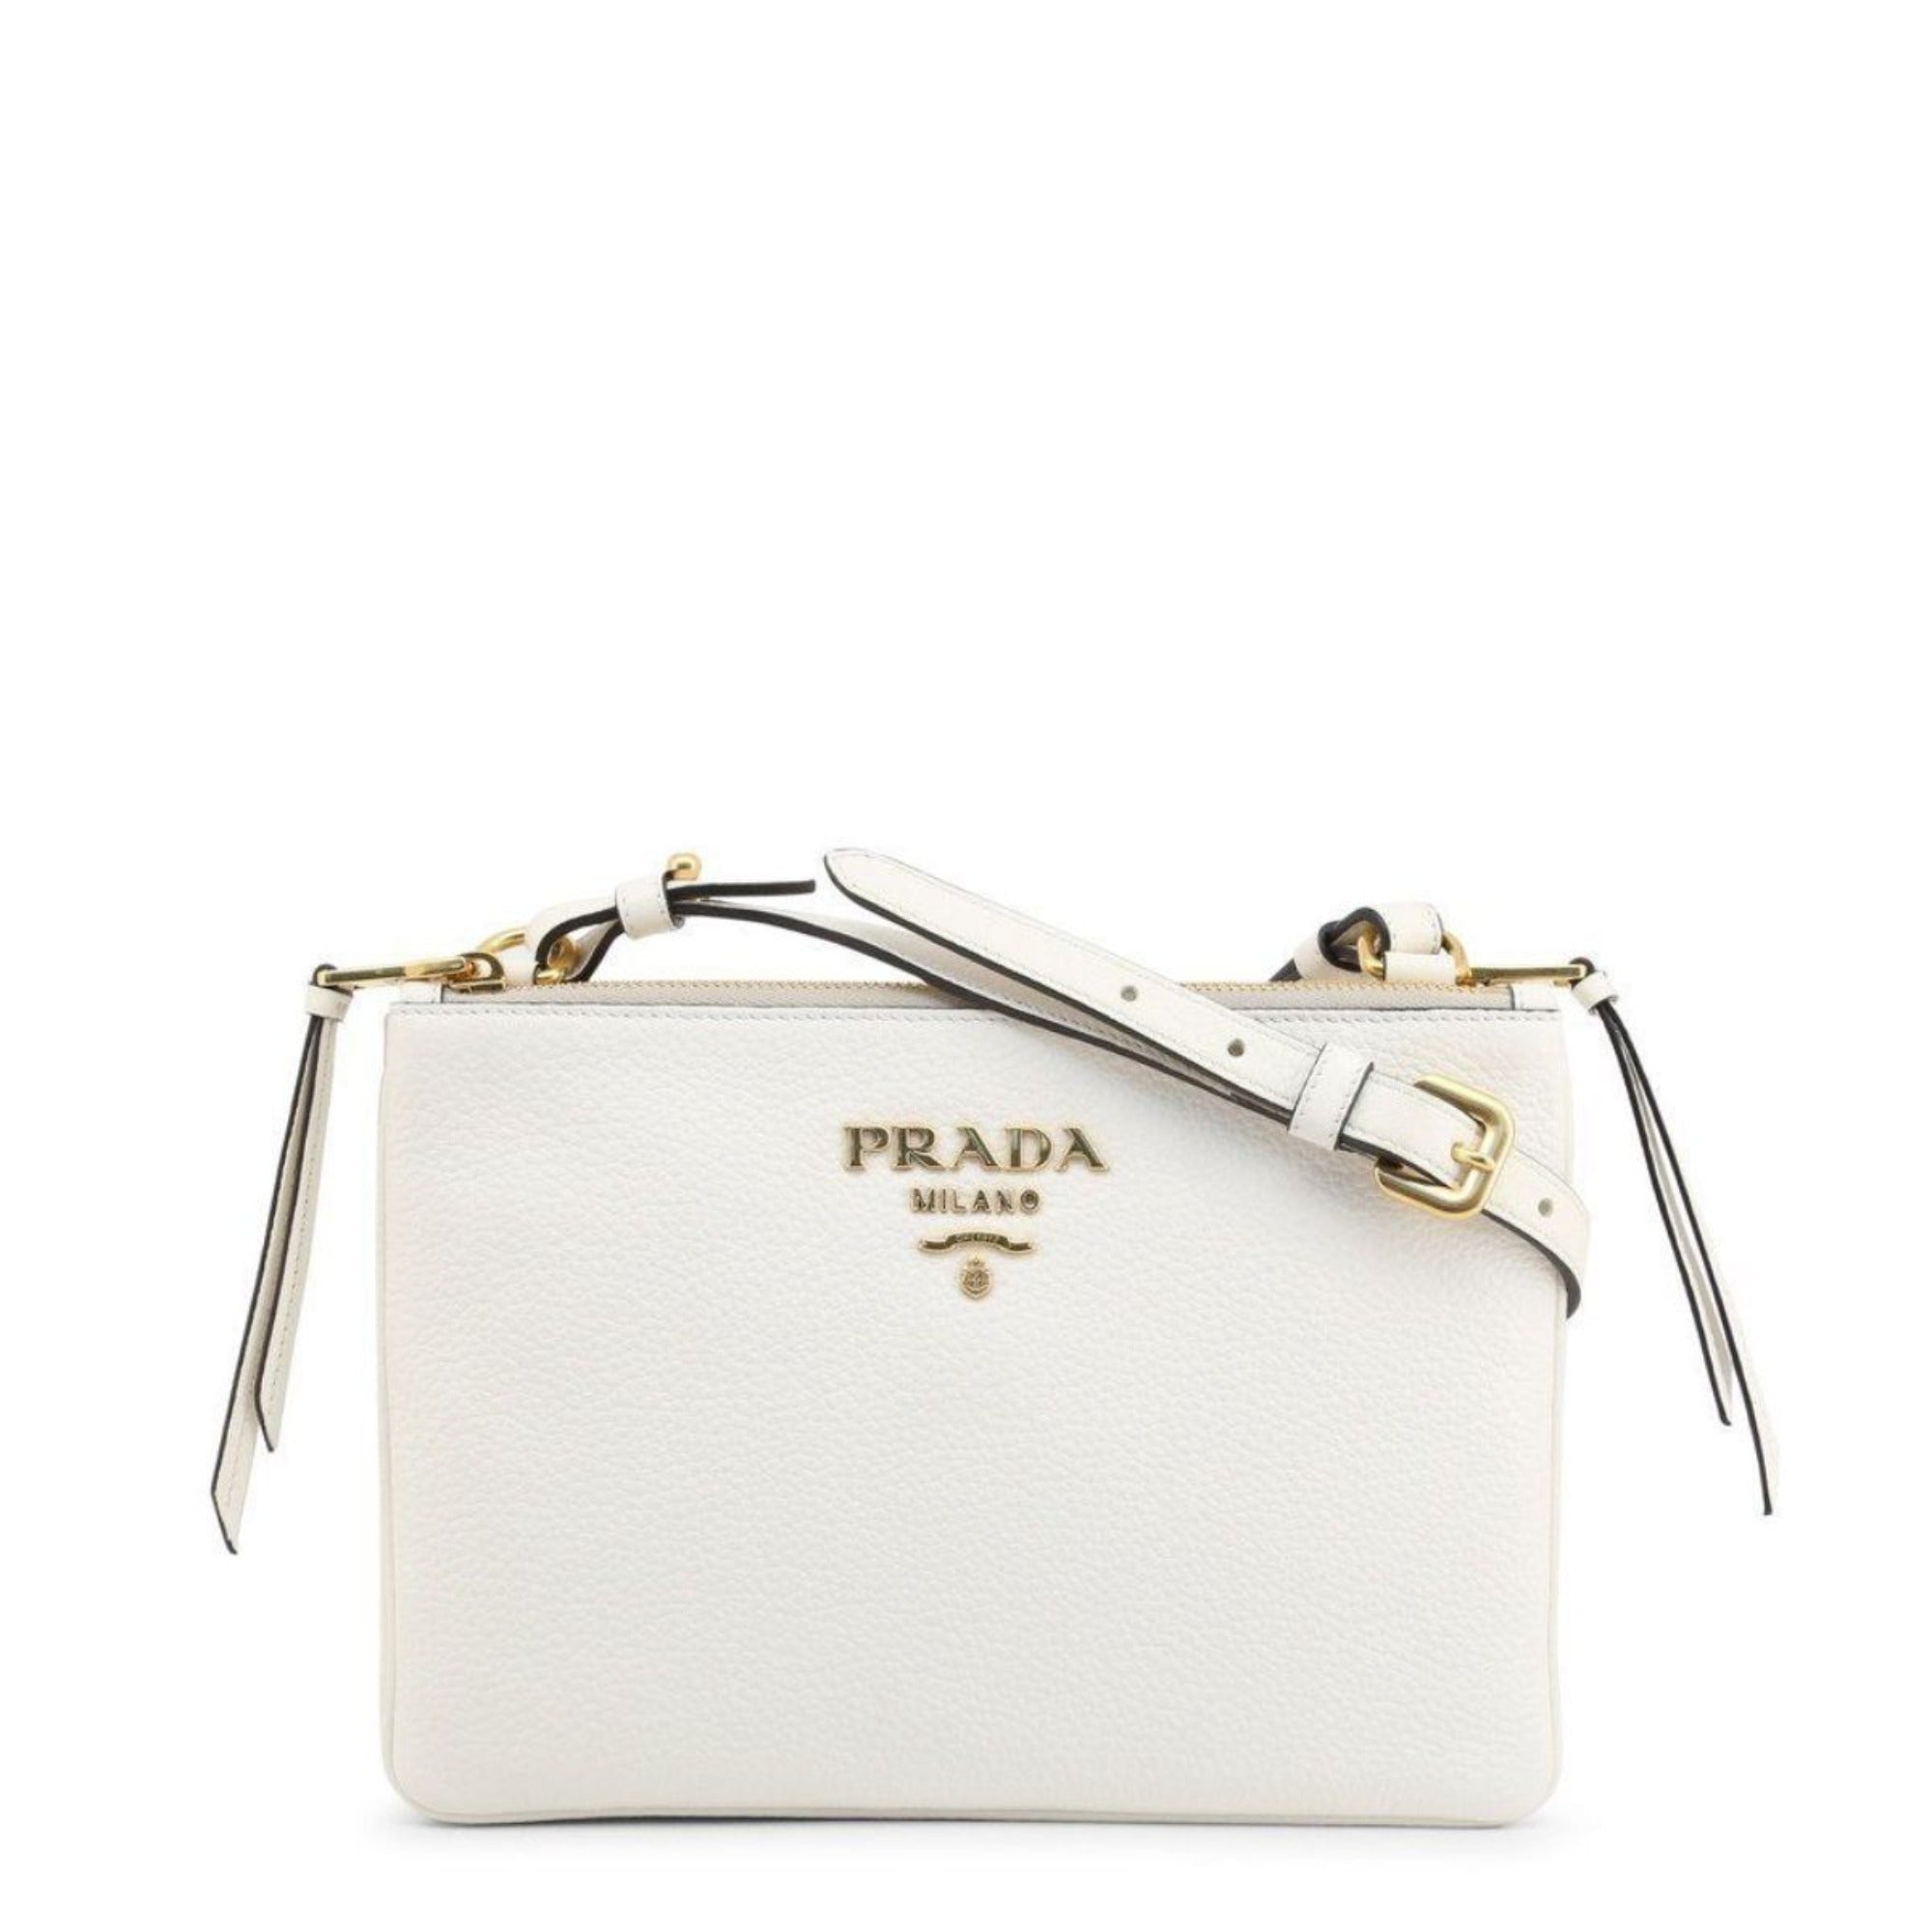 PRADA white leather large bag purse with gold and silver tone hardware  AUTHENTIC | eBay